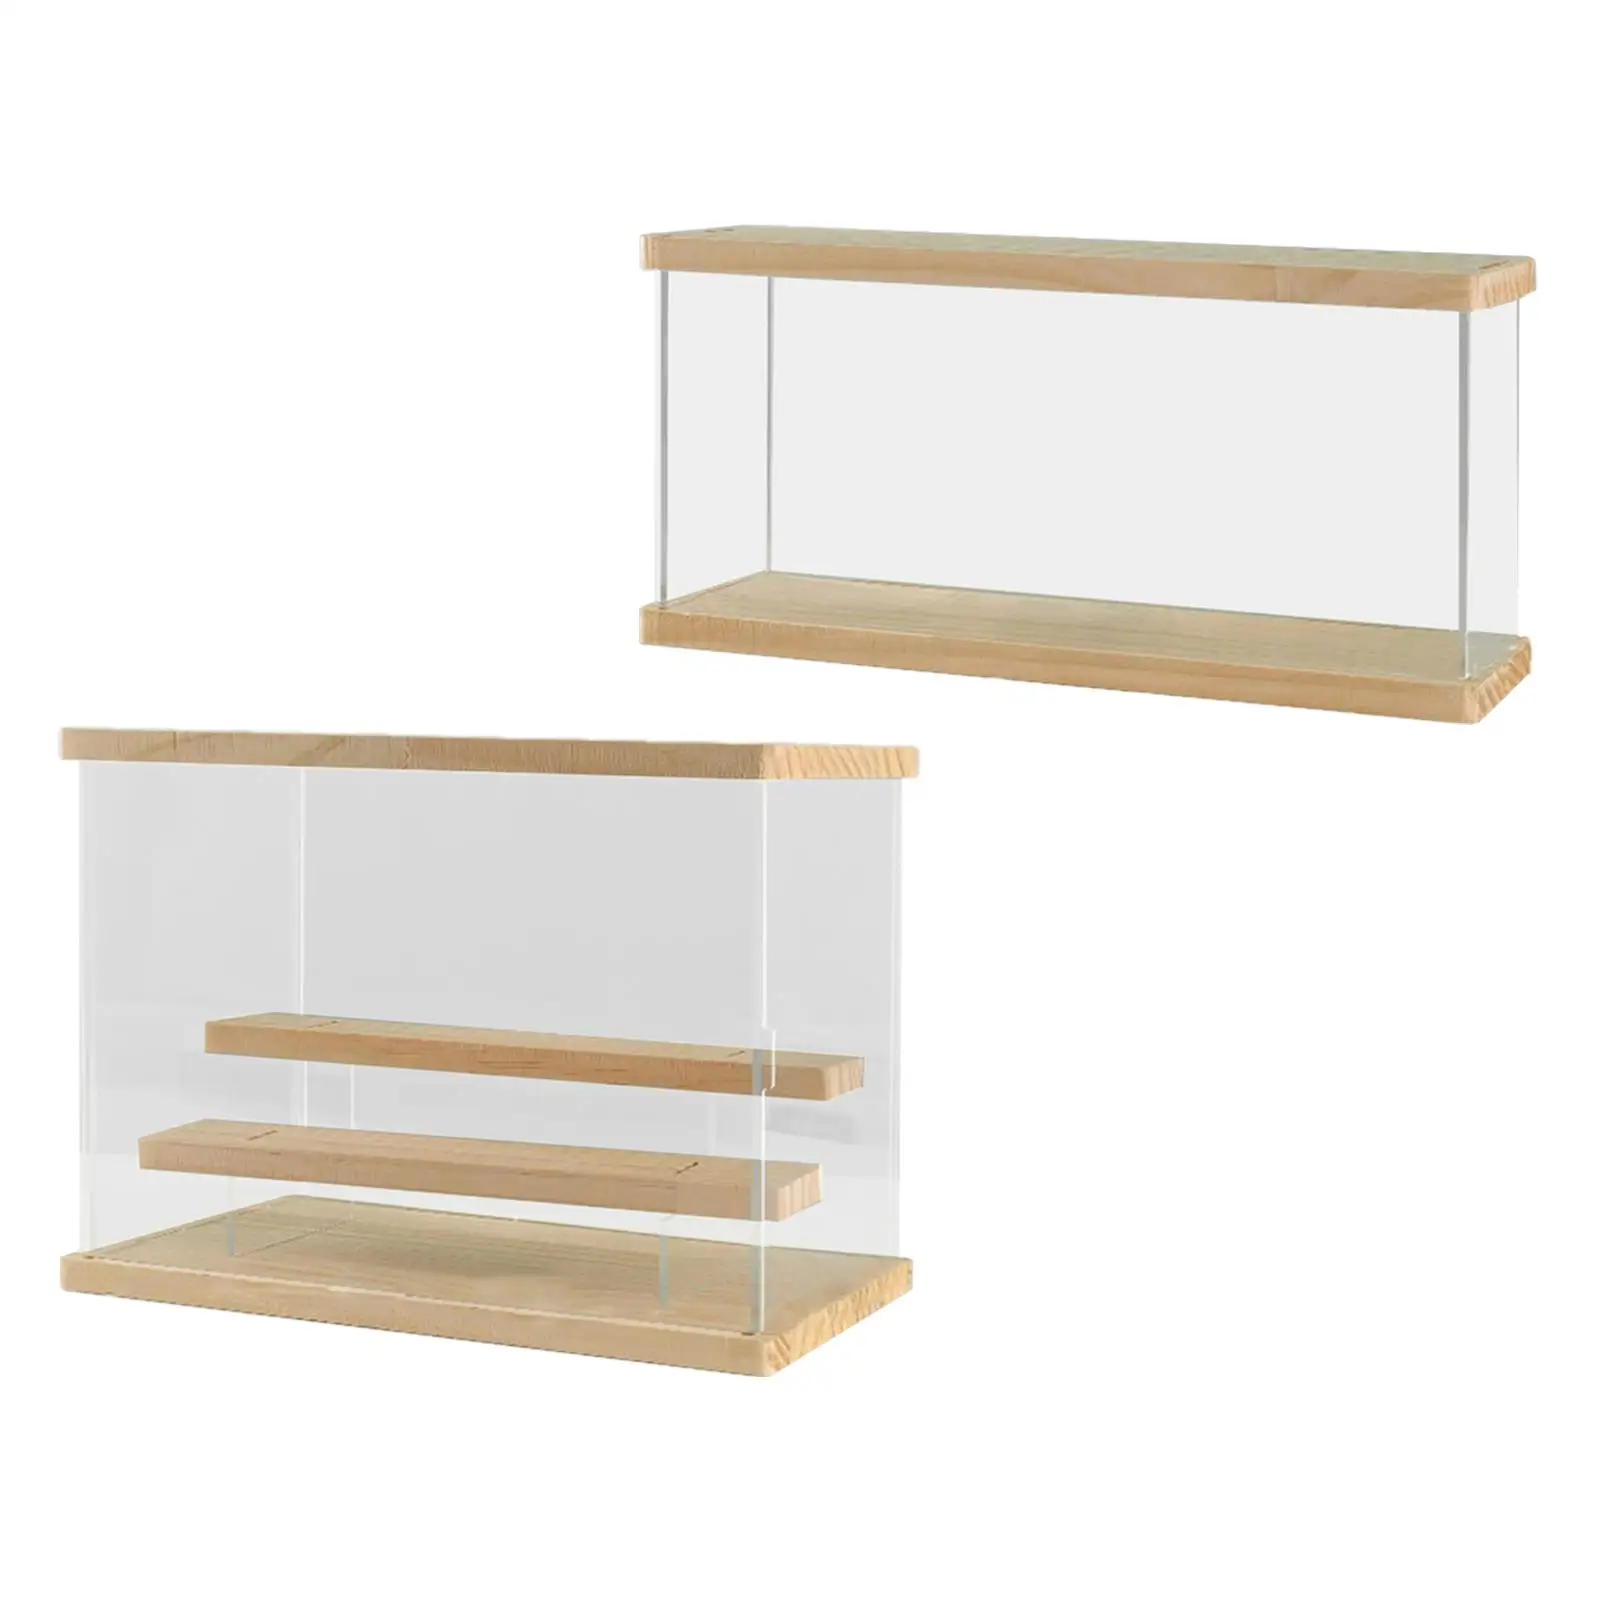 Acrylic Display Case Dustproof Showcase for Countertop Collectibles Toys